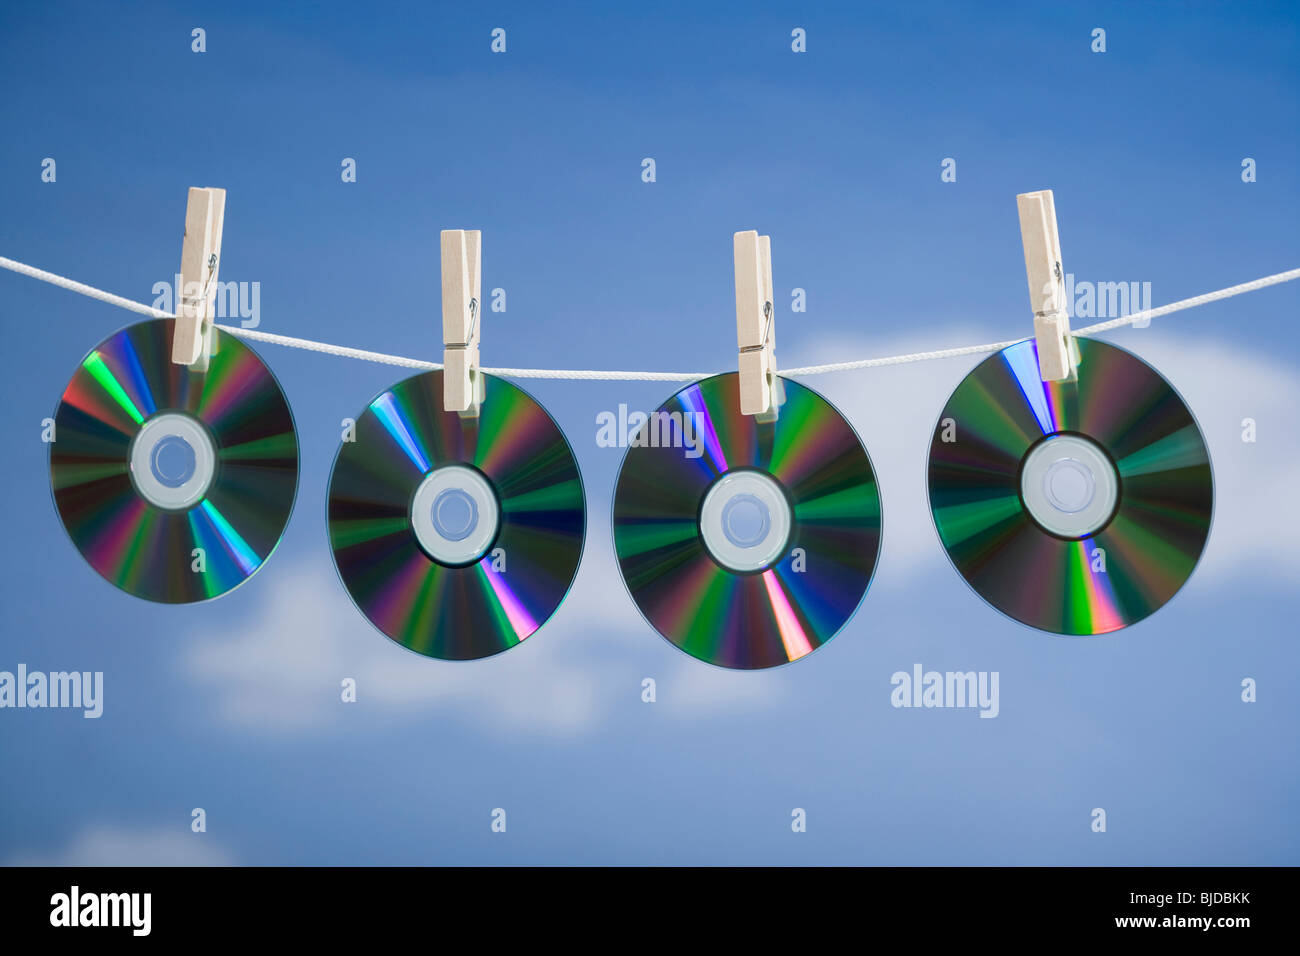 Compact discs hung out to dry. Stock Photo